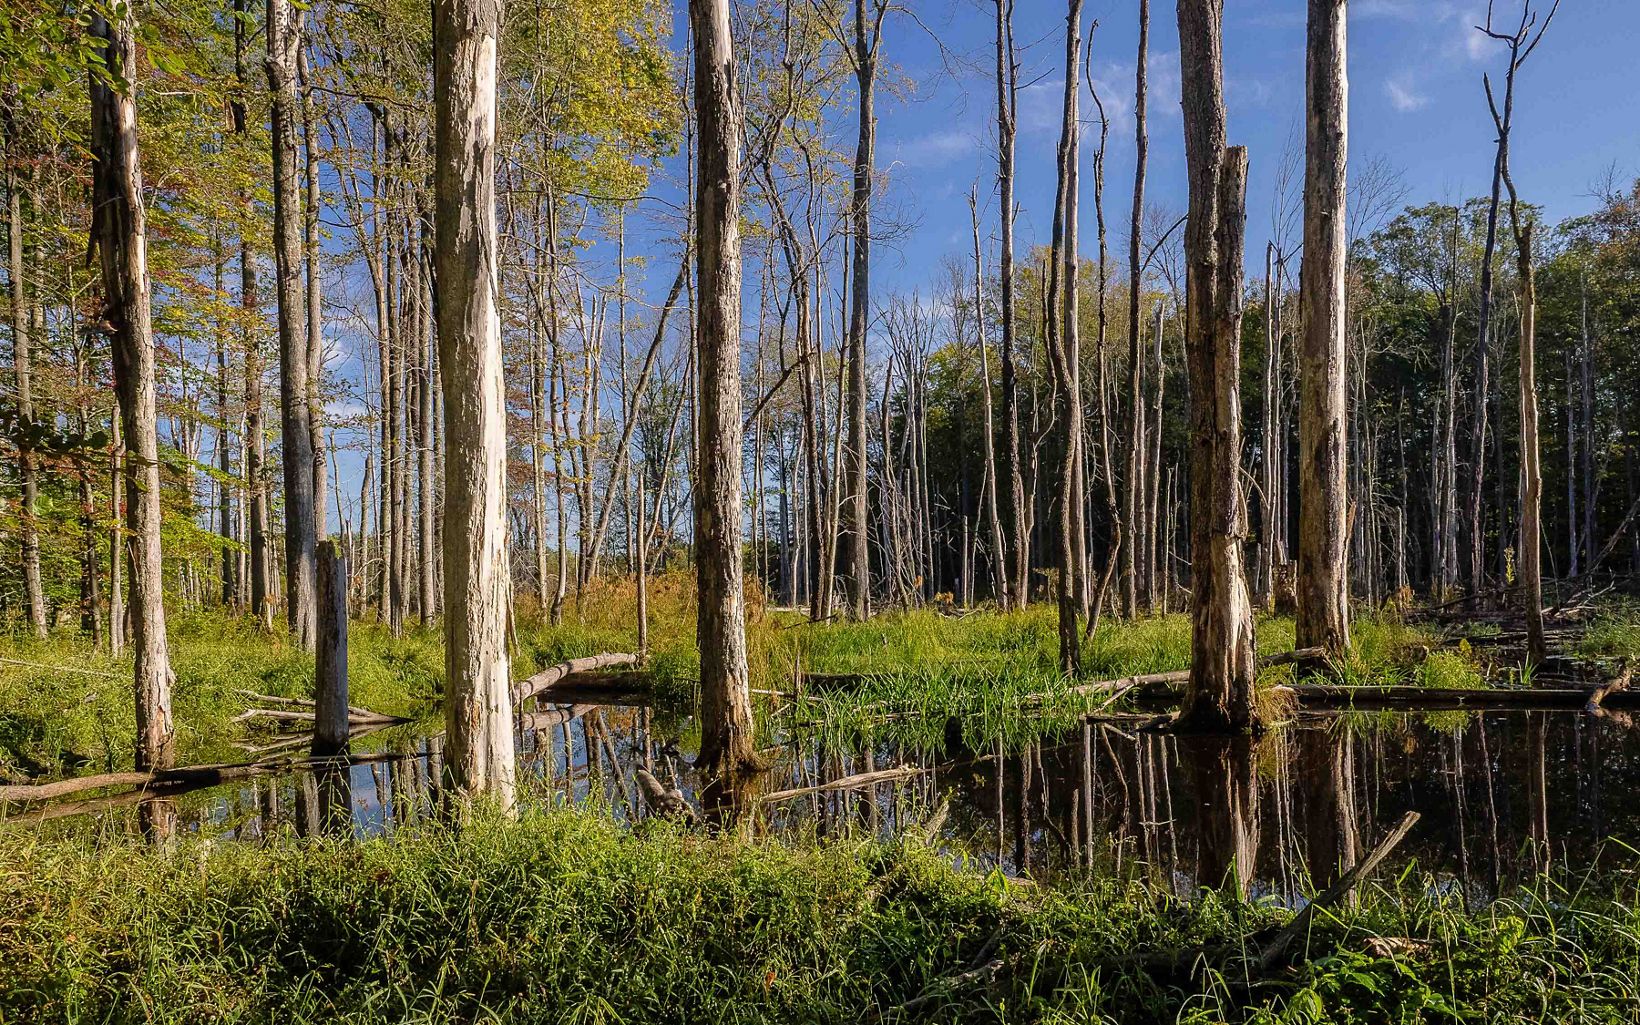 Many trees standing in a water-covered ground with shorter shrubs and grasses growing in the foreground and background.